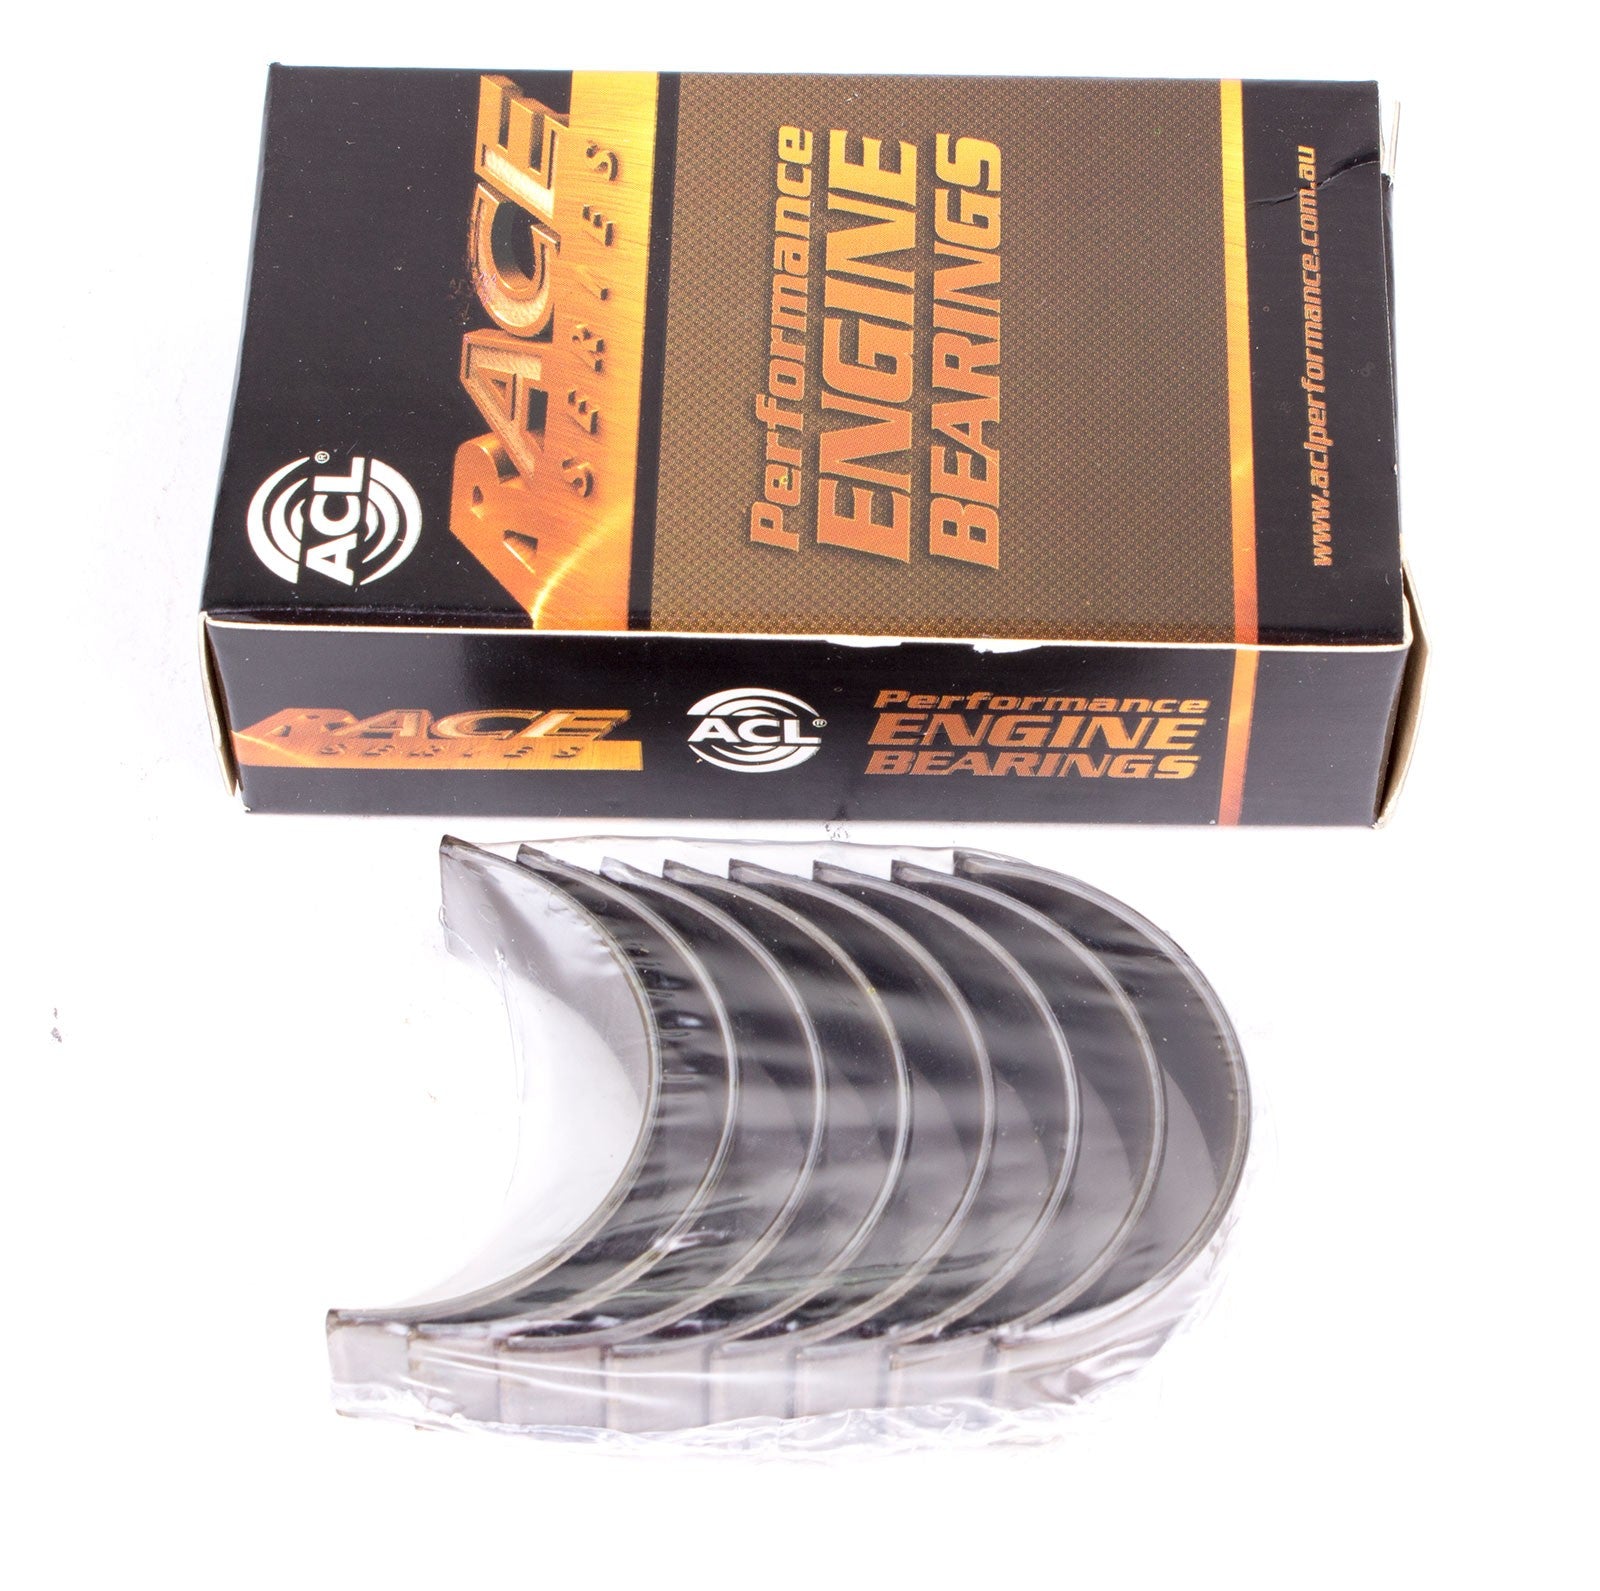 ACL 7M7989H-.025 Main bearing set (ACL Race Series) Photo-0 